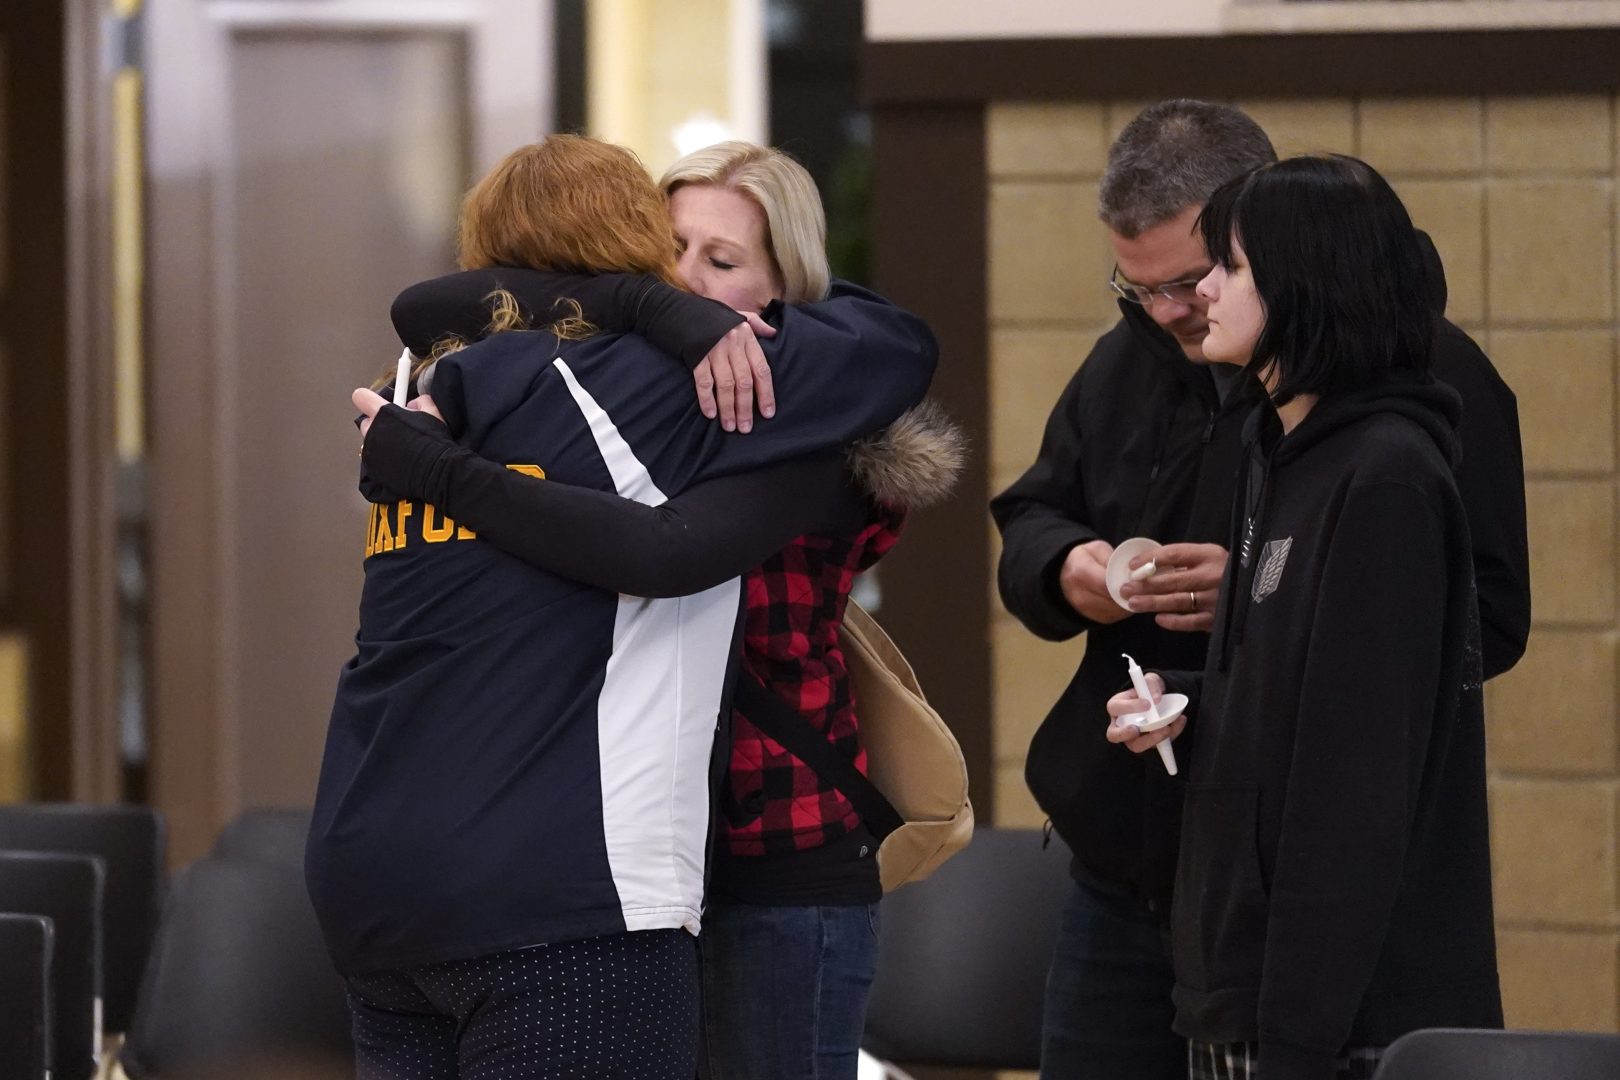 People attending a vigil embrace at LakePoint Community Church in Oxford, Mich., Tuesday, Nov. 30, 2021. Authorities say a 15-year-old sophomore opened fire at Oxford High School, killing three students and wounding several others, including a teacher. 